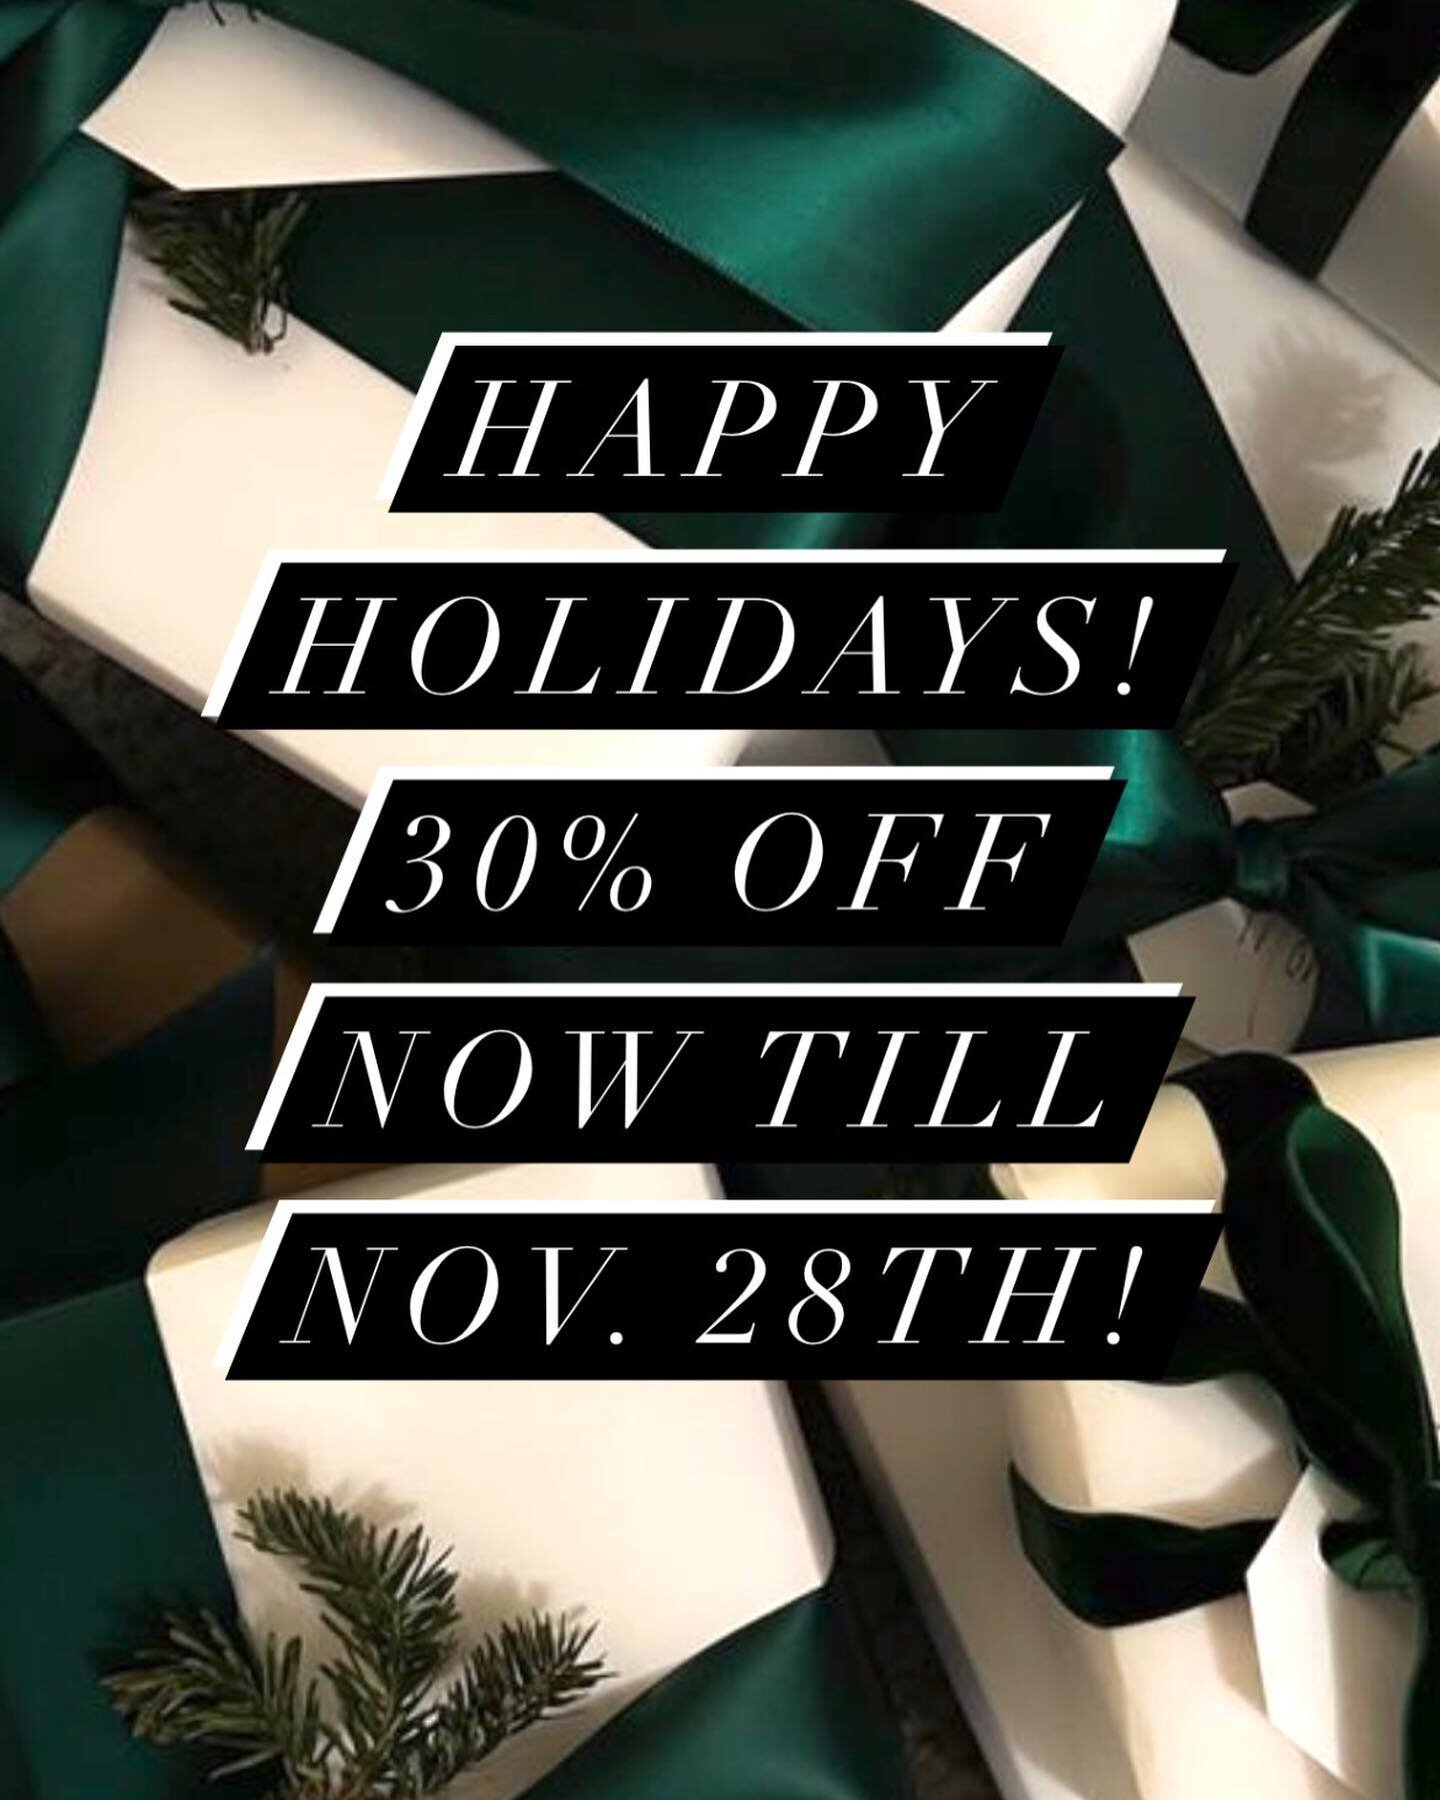 Happy Holidays, Black Friday came early! Take 30% off your order now till Nov. 28th! Holiday shopping made easy:)
&bull;
&bull;
&bull;
&bull;
&bull;
#shoplarueandco #larueandcofine #larueandco #handmadejewelry #handmadefinejewelry #14k #blackfriday23